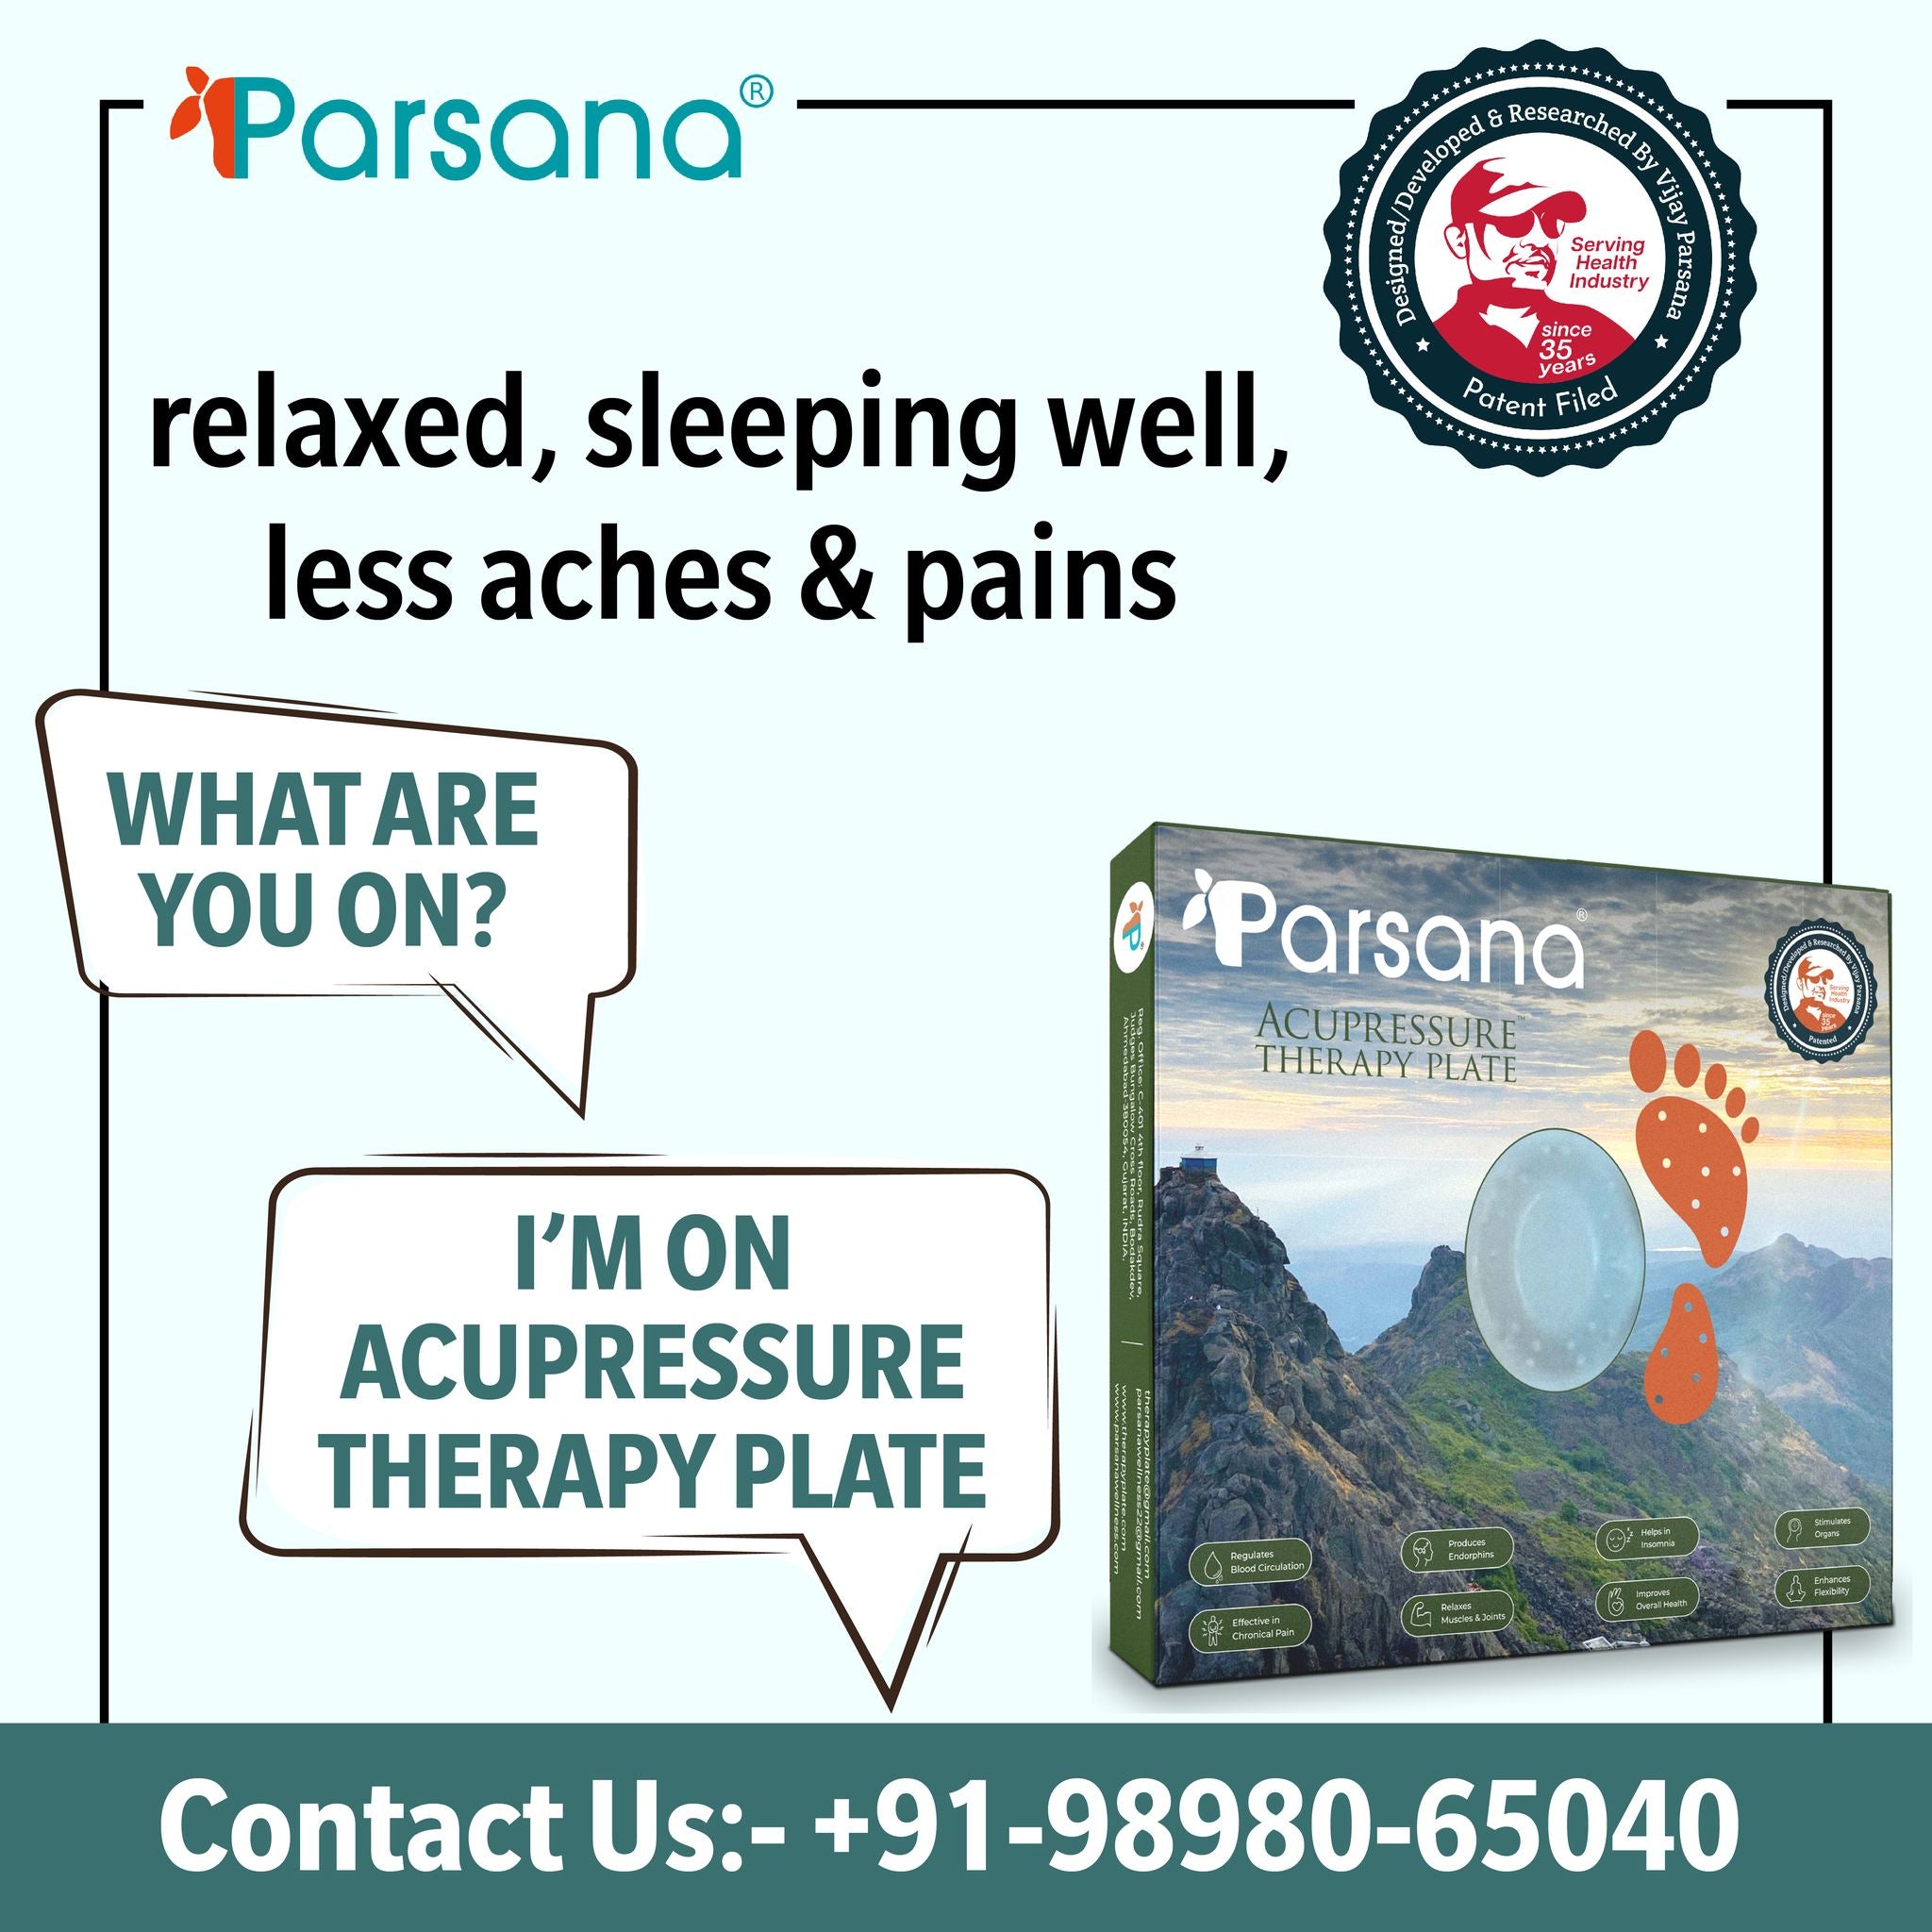 Ultimate Relief: The Key to Your Well-Being in 100 Names - Choose Parsana Acupressure Therapy Plate